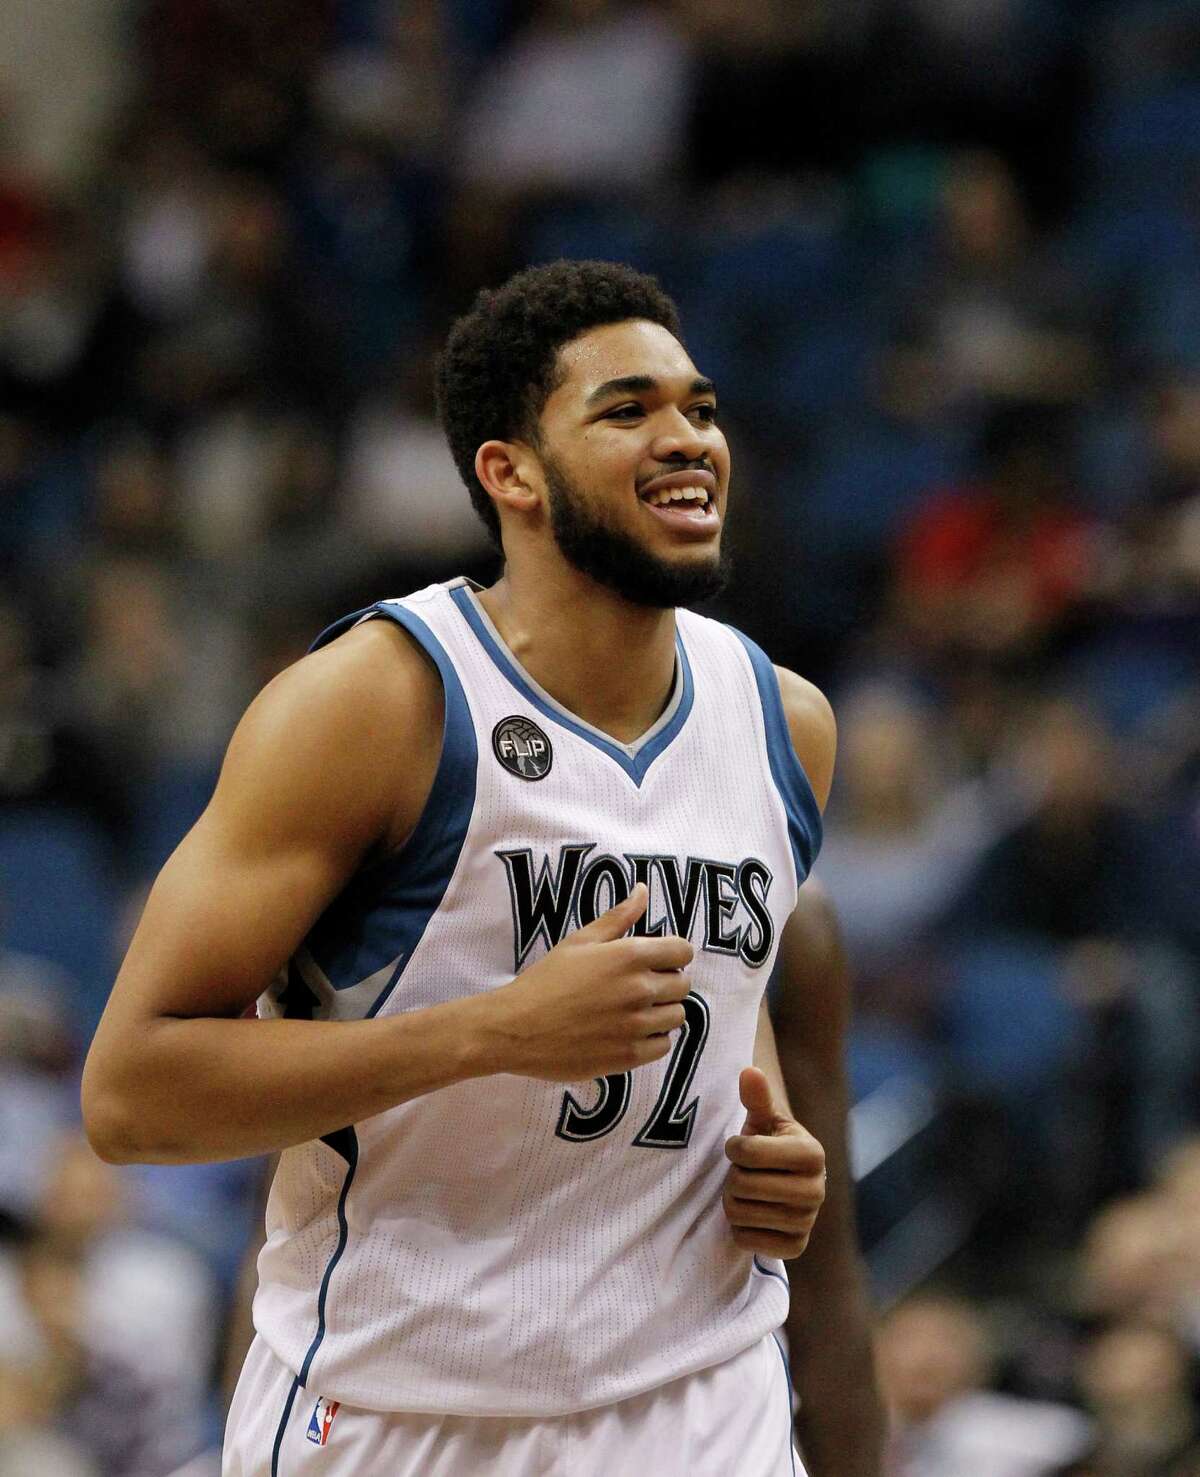 Minnesota Timberwolves center Karl-Anthony Towns (32) smiles during the second half of an NBA basketball game against the Houston Rockets in Minneapolis, Monday, April 11, 2016. The Rockets won 129-105.